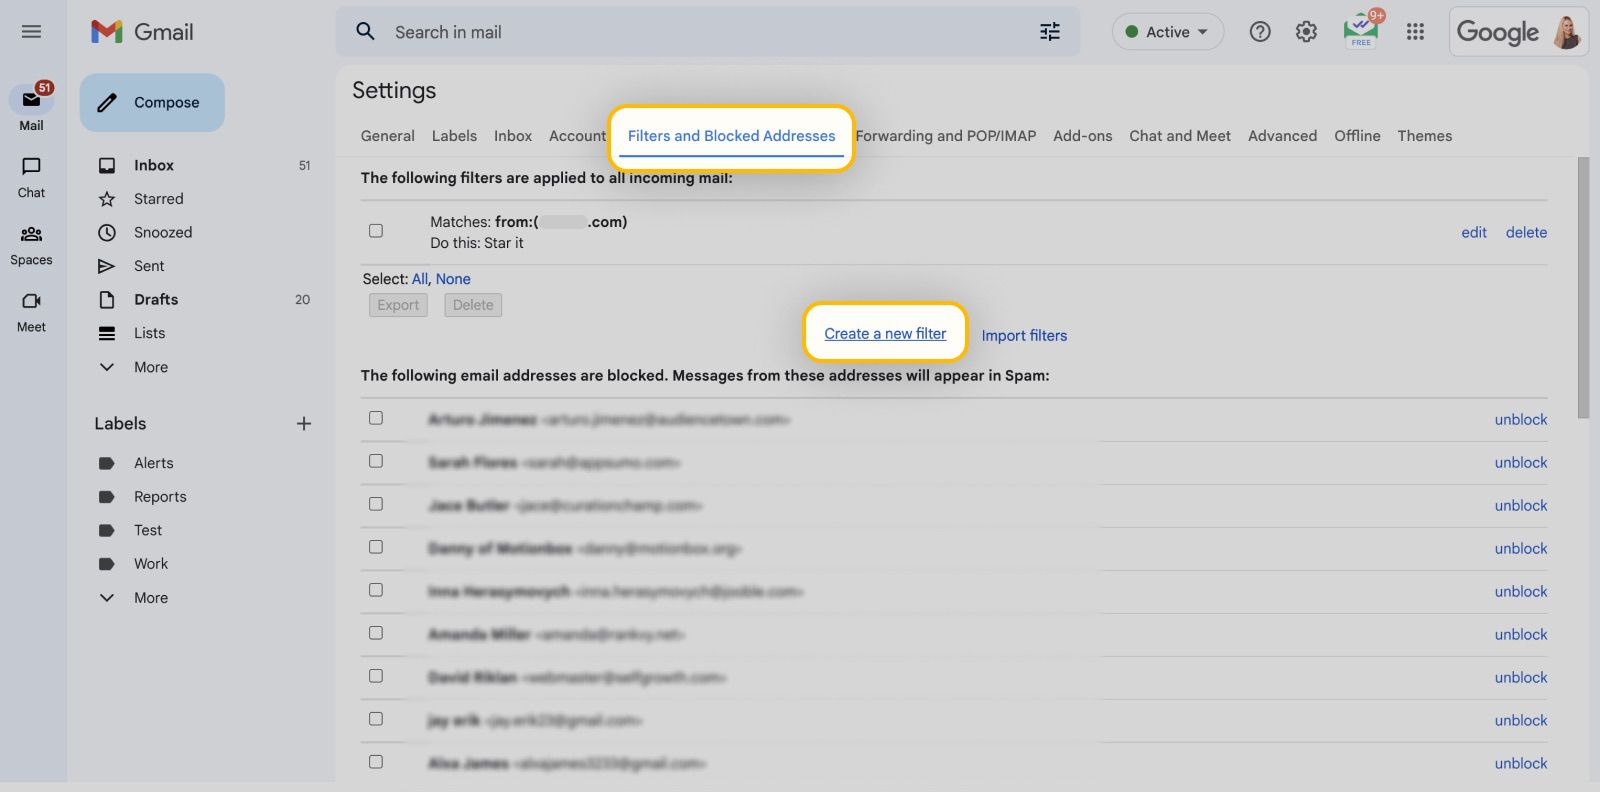 How To Block Someone On Gmail Full Guide On Blocking Emails 